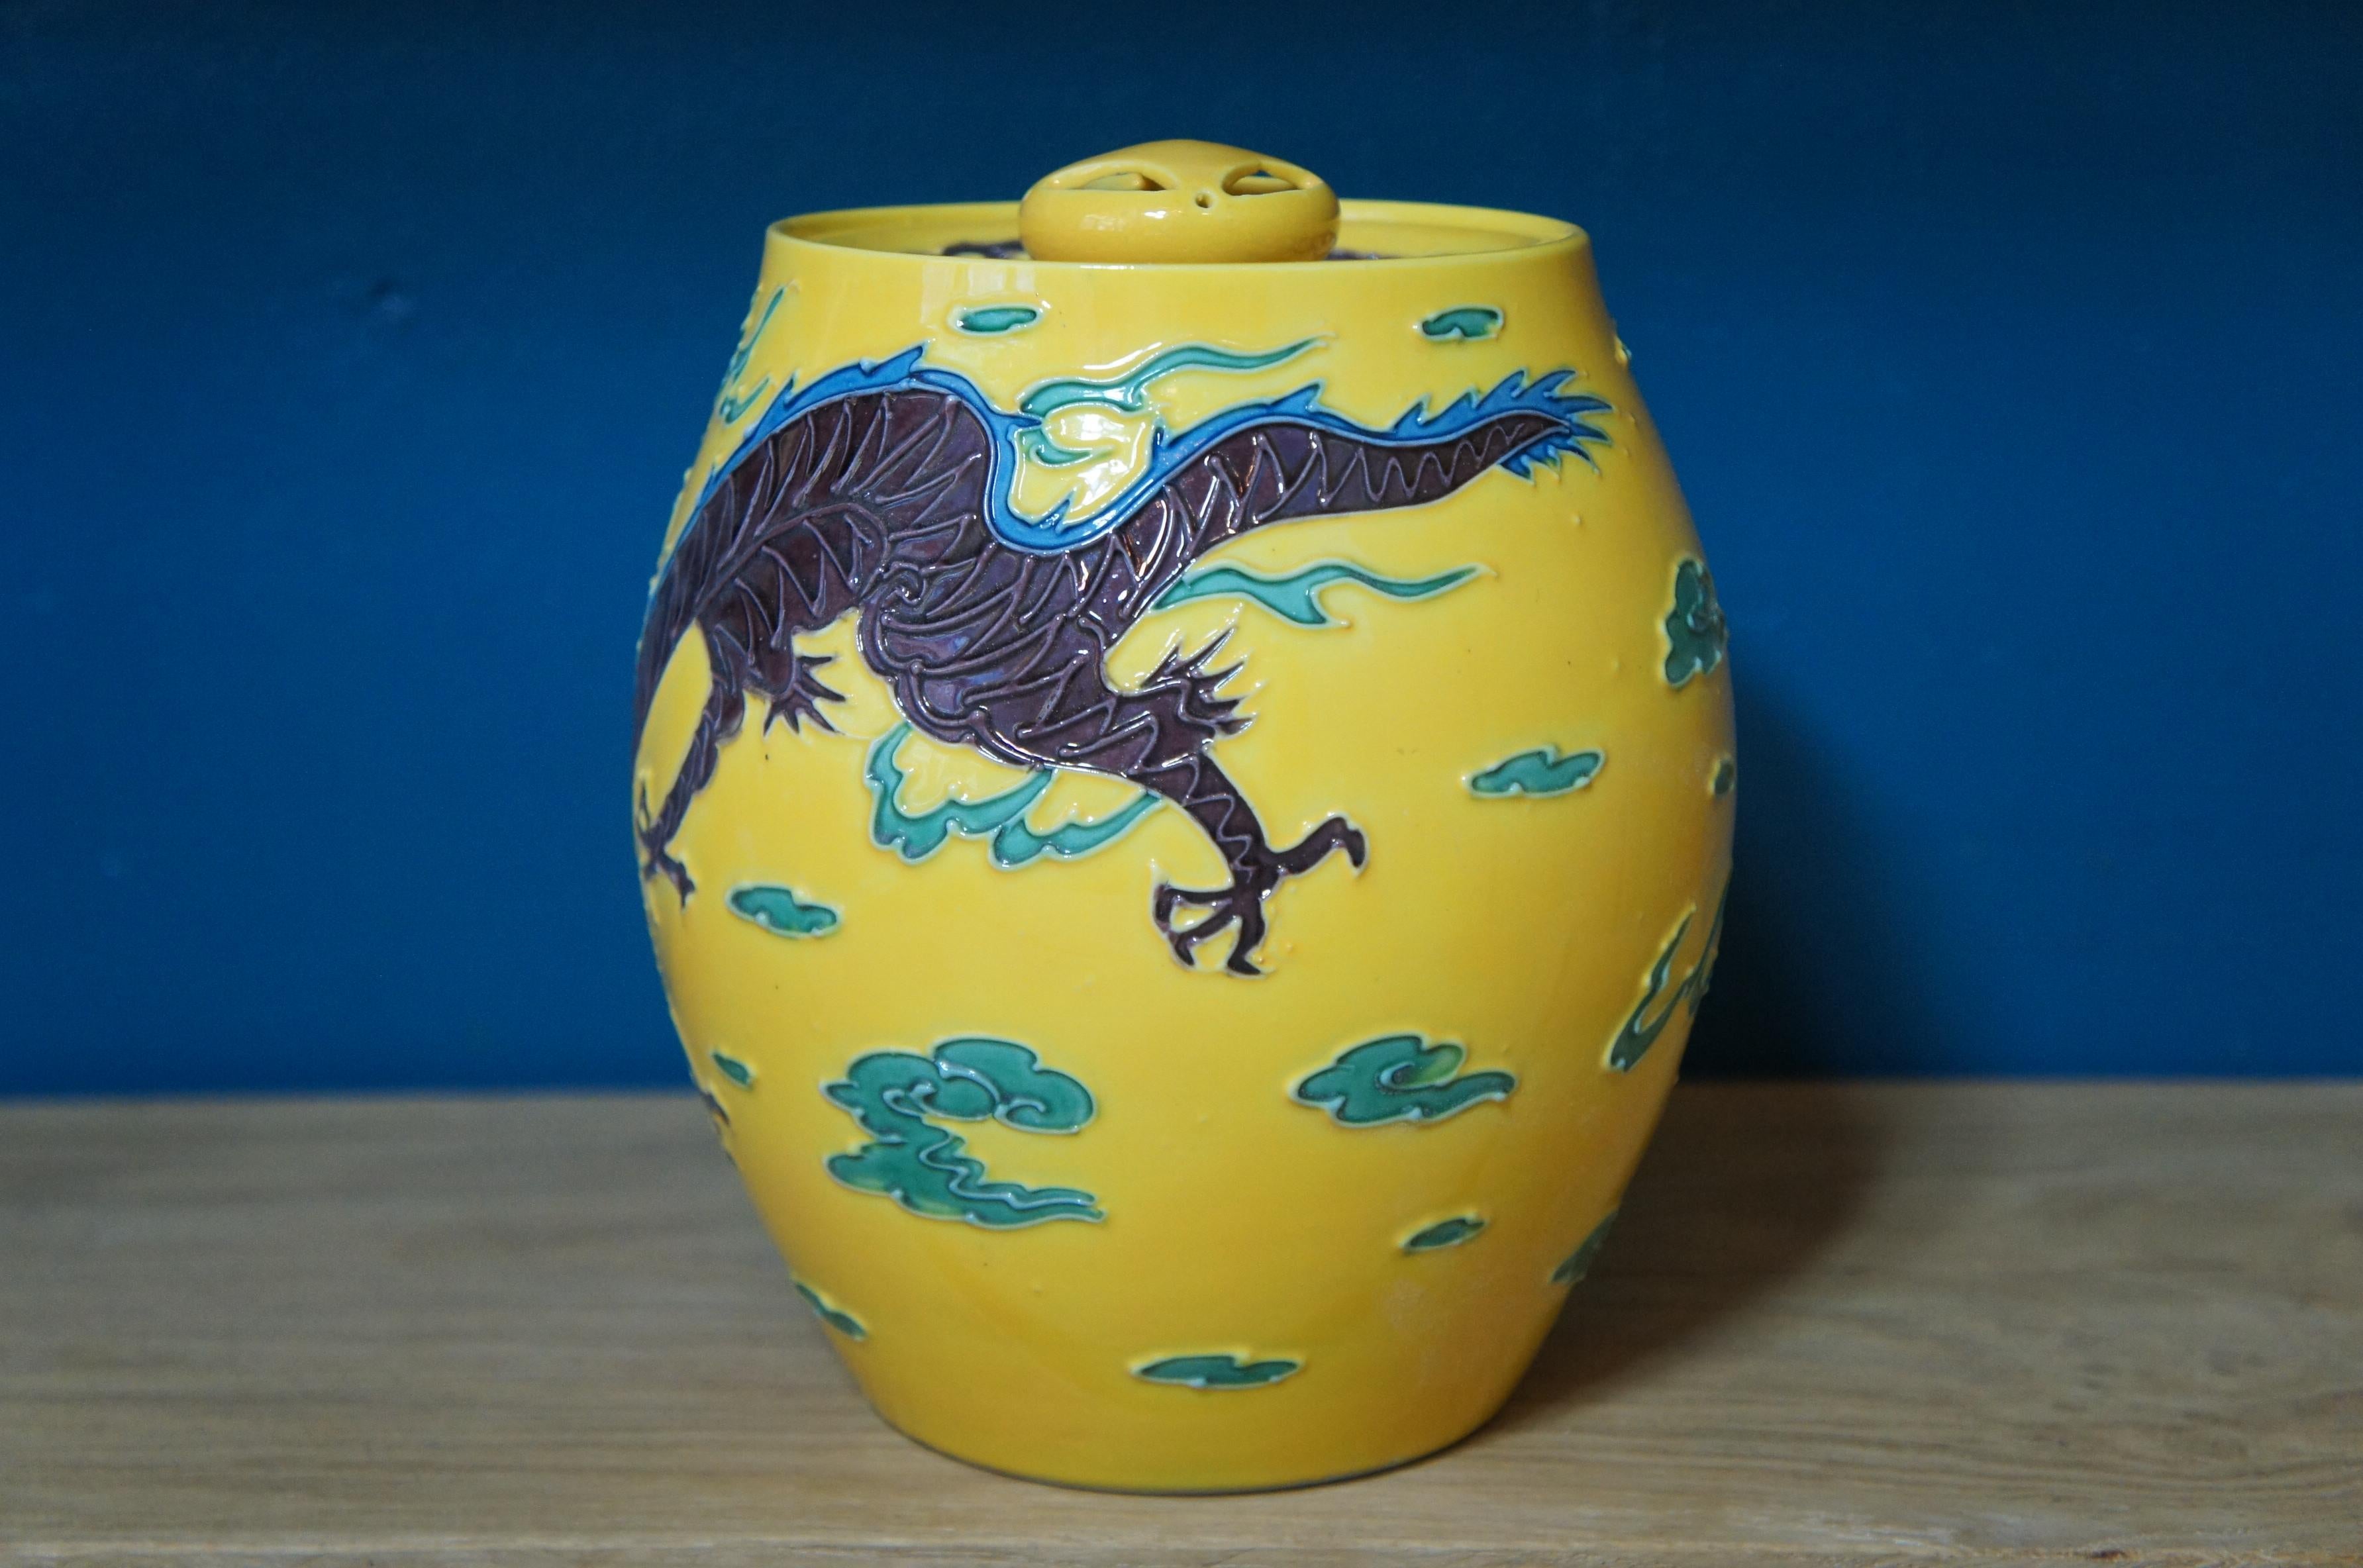 Beautiful Japanese yellow porcelain vase with lid.
With 3 dimensional image of a flying brown dragon among green clouds, from inspired Chinese style.
    